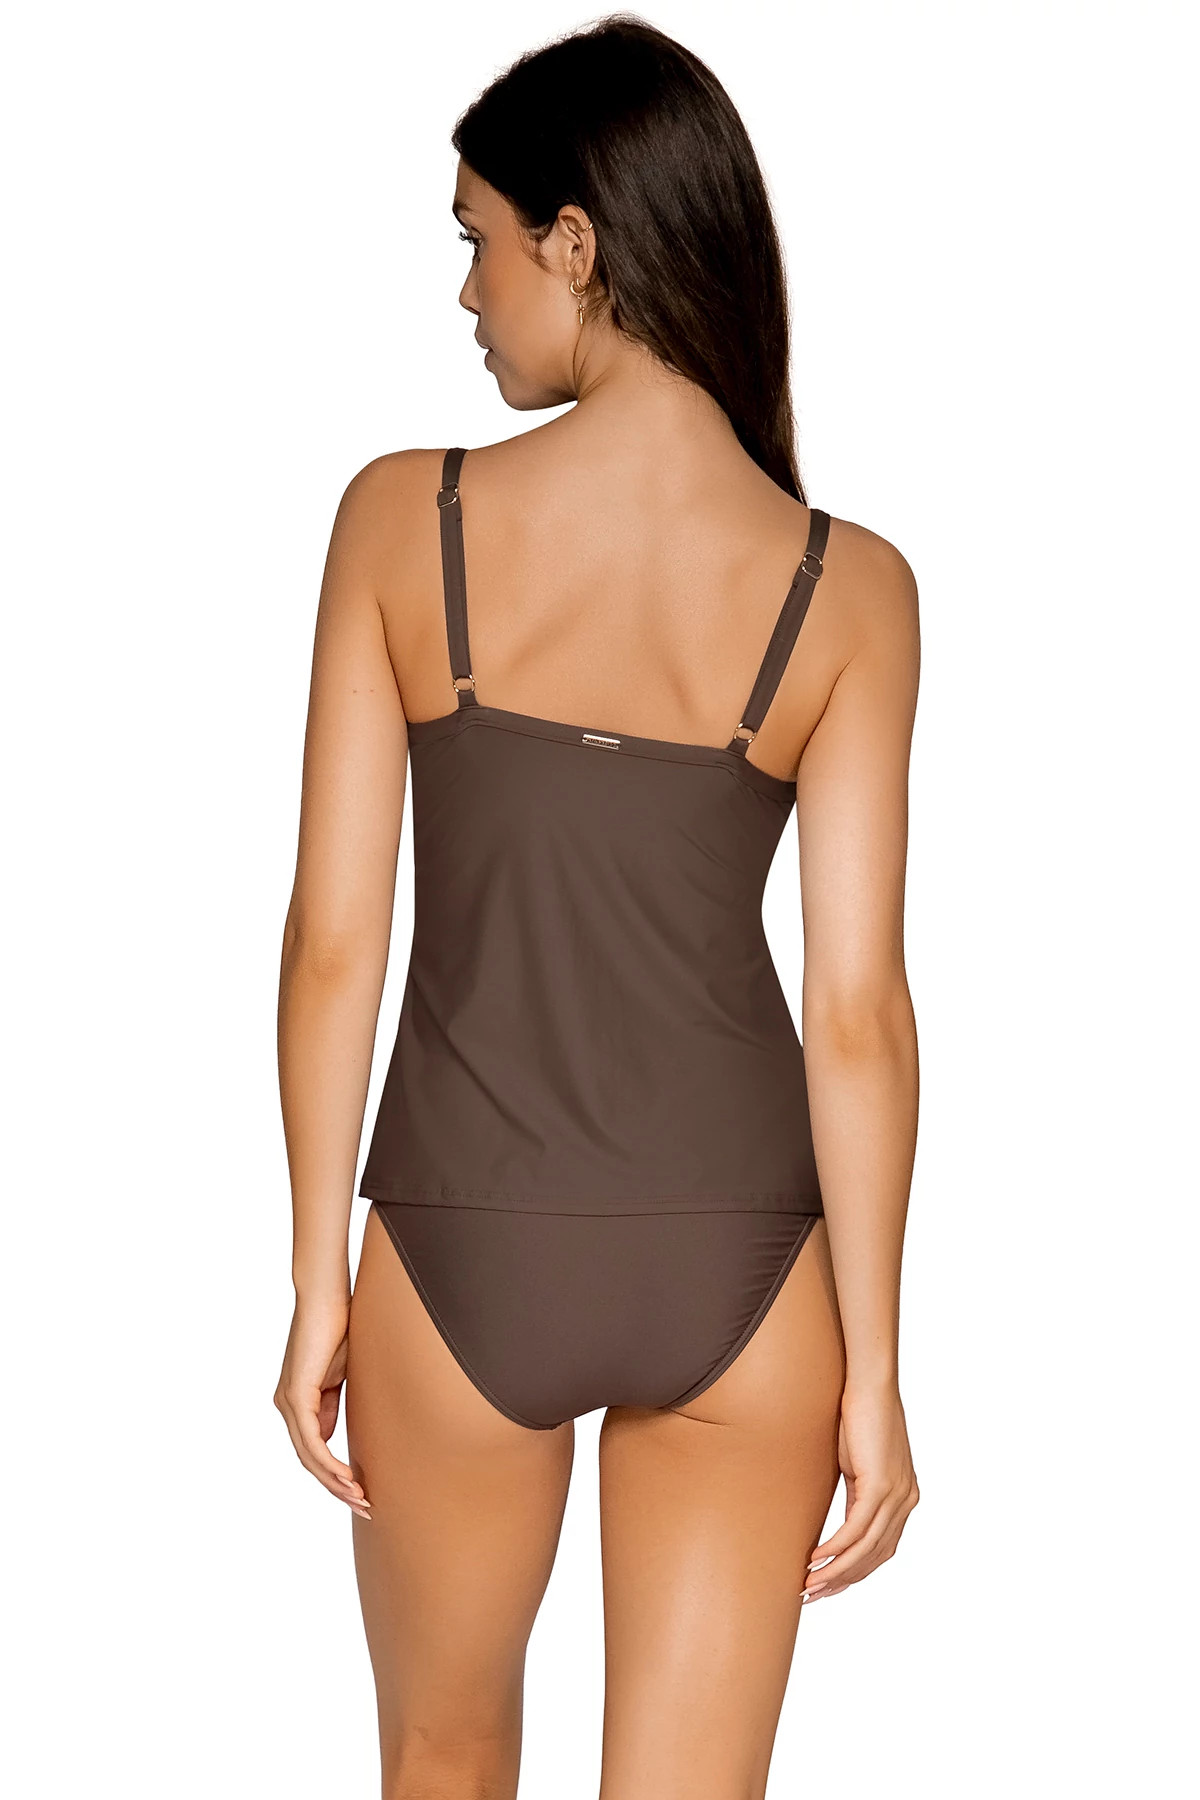 KONA Forever Underwire Bra Tankini Top (E-H Cup) image number 2